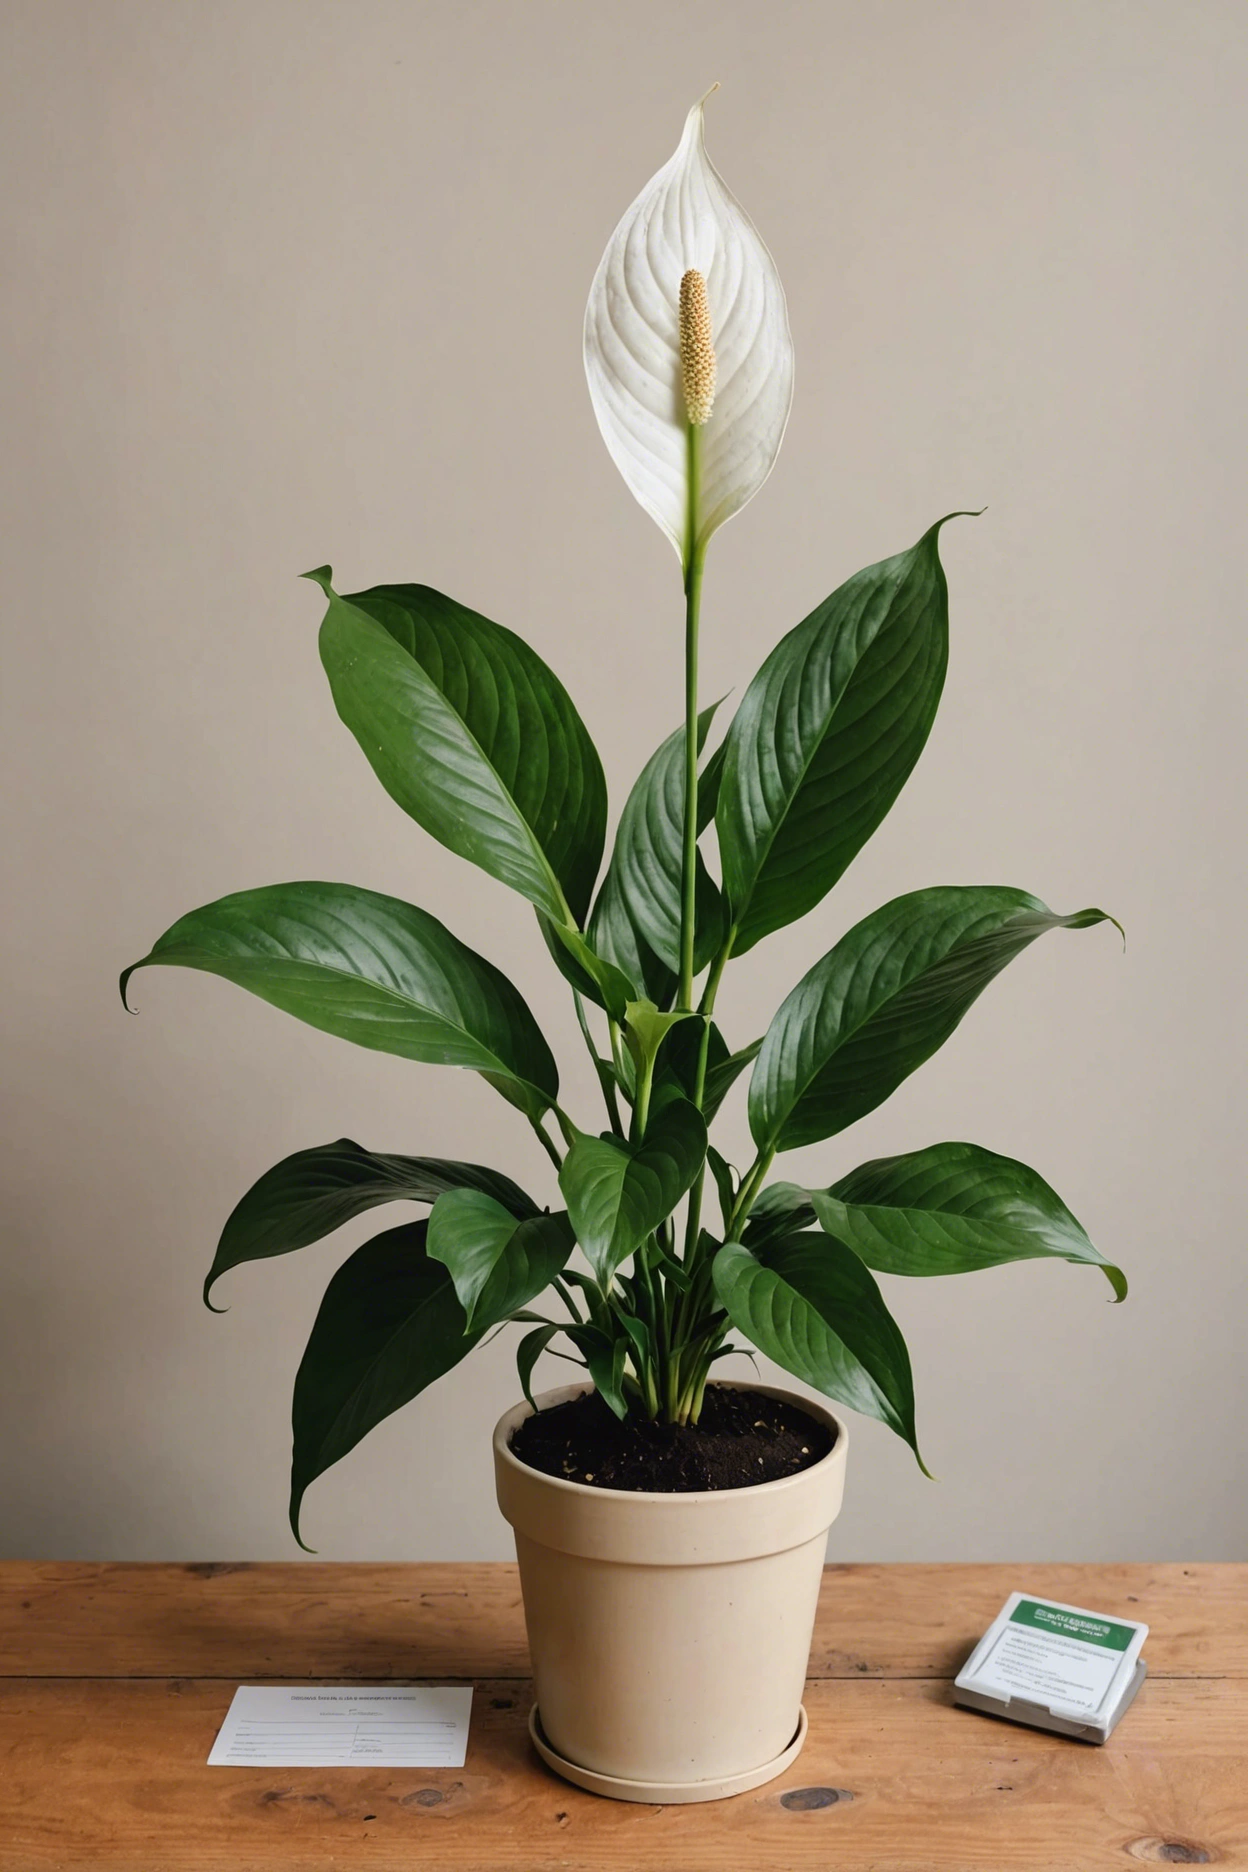 "Peace lily with unusually green flowers on a wooden surface, next to soil testing tools and a diagnostic chart."